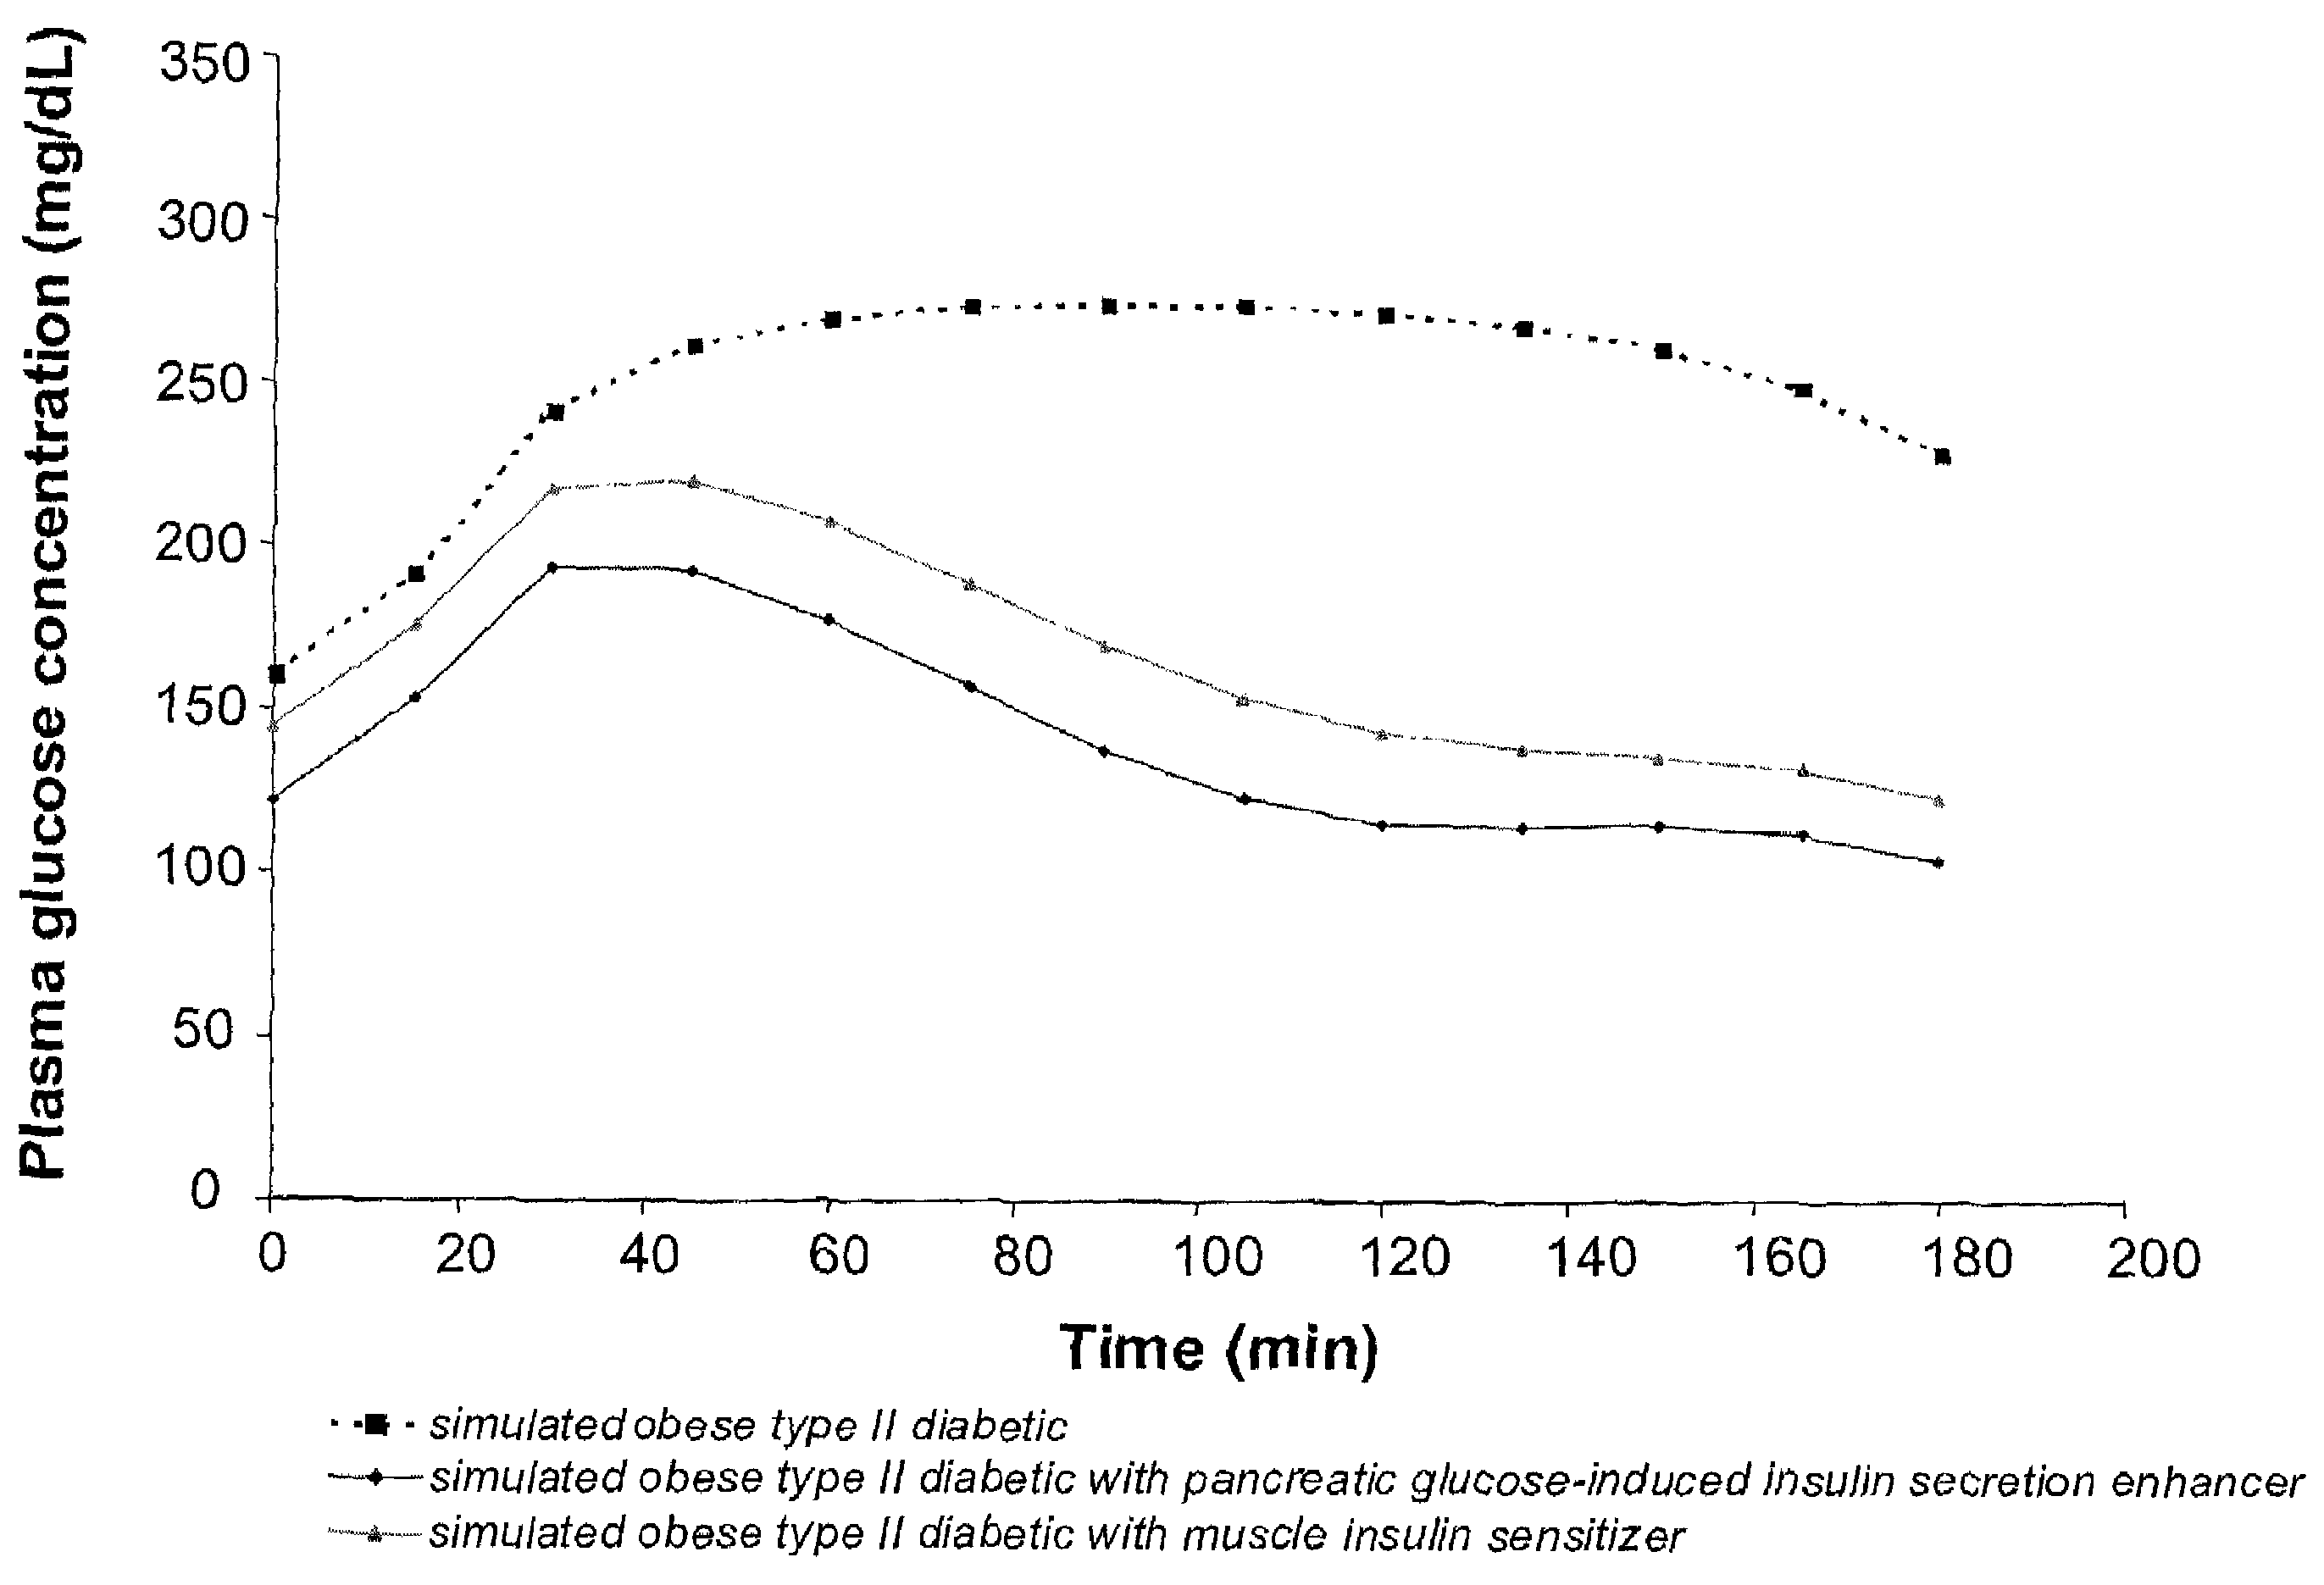 Method and apparatus for computer modeling diabetes